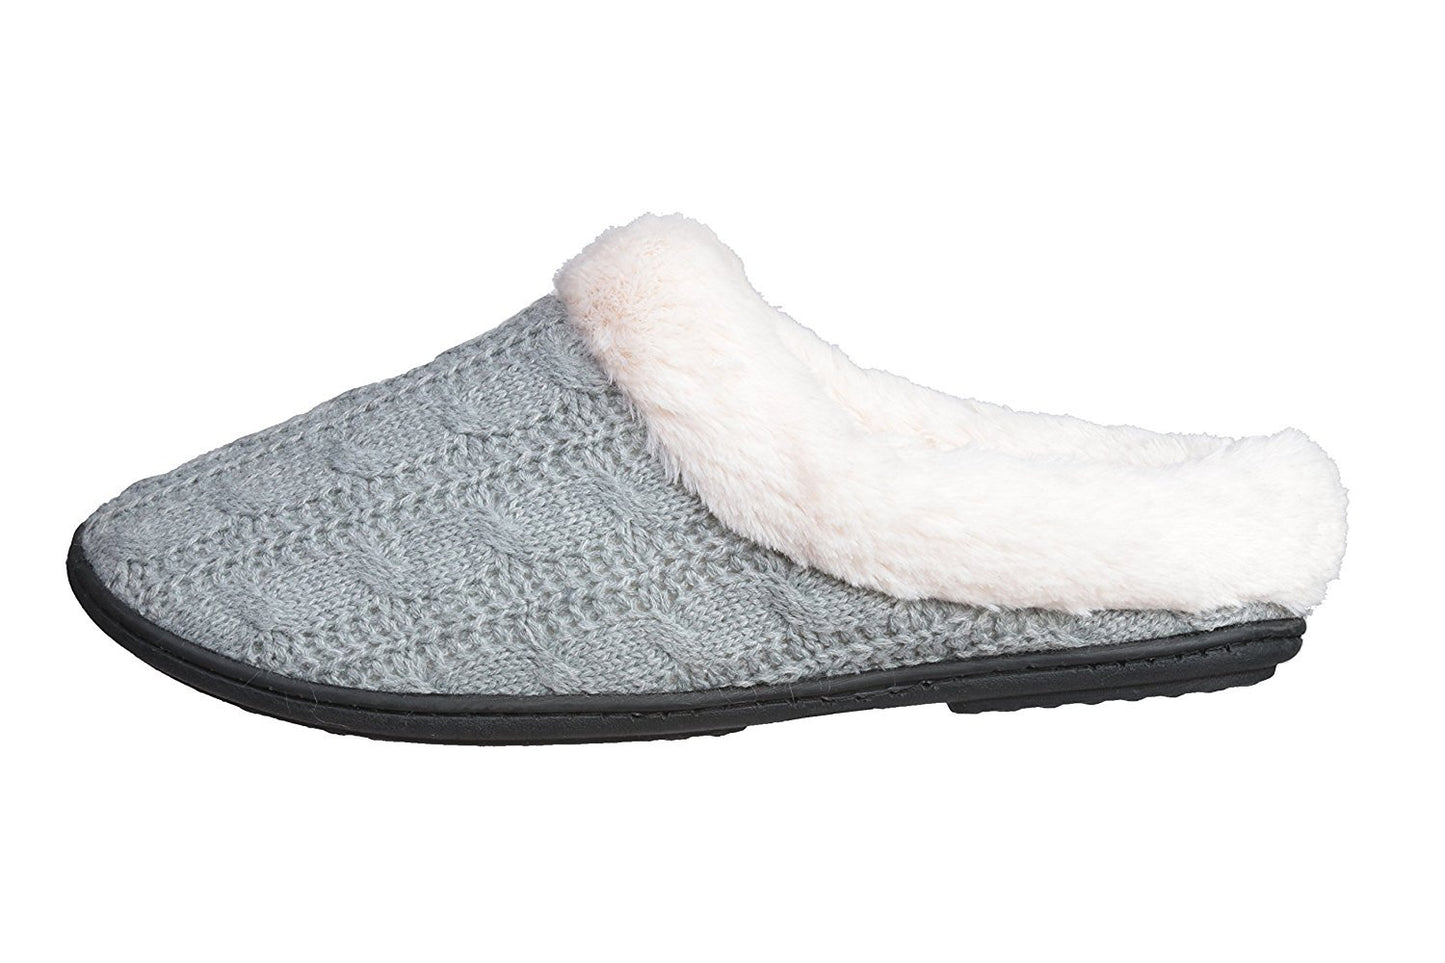 Roxoni Women's Slippers Cable Knit Super Cozy Comfort Clog